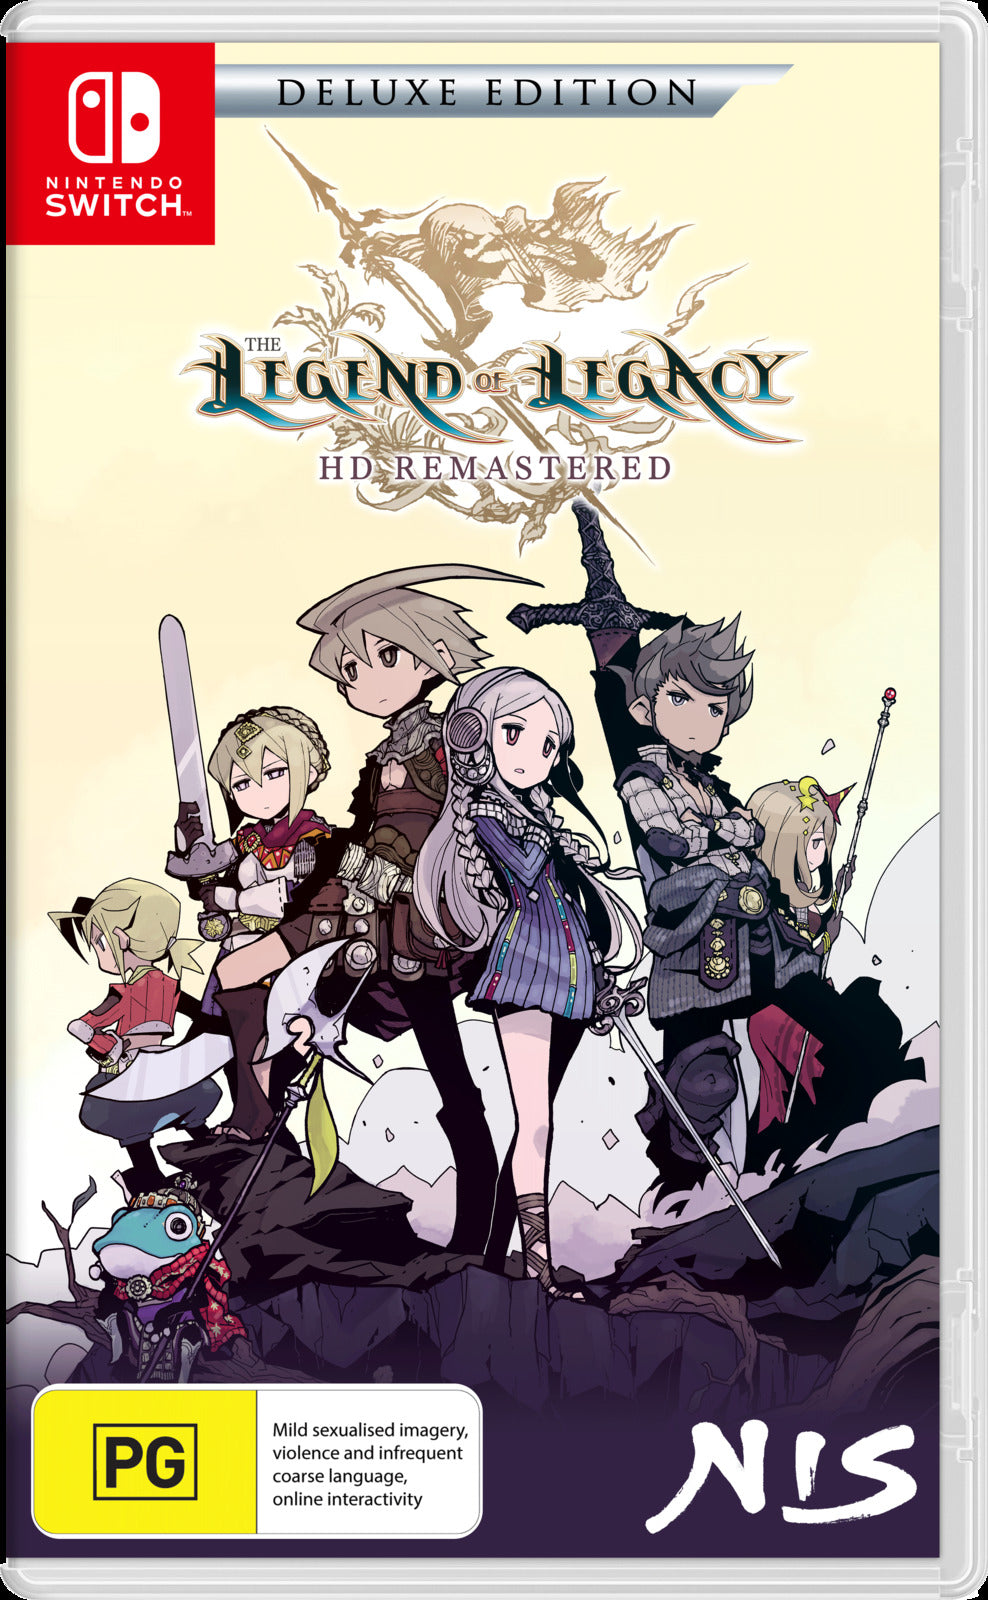 The Legend of Legacy HD Remastered Deluxe Edition - Nintendo Switch